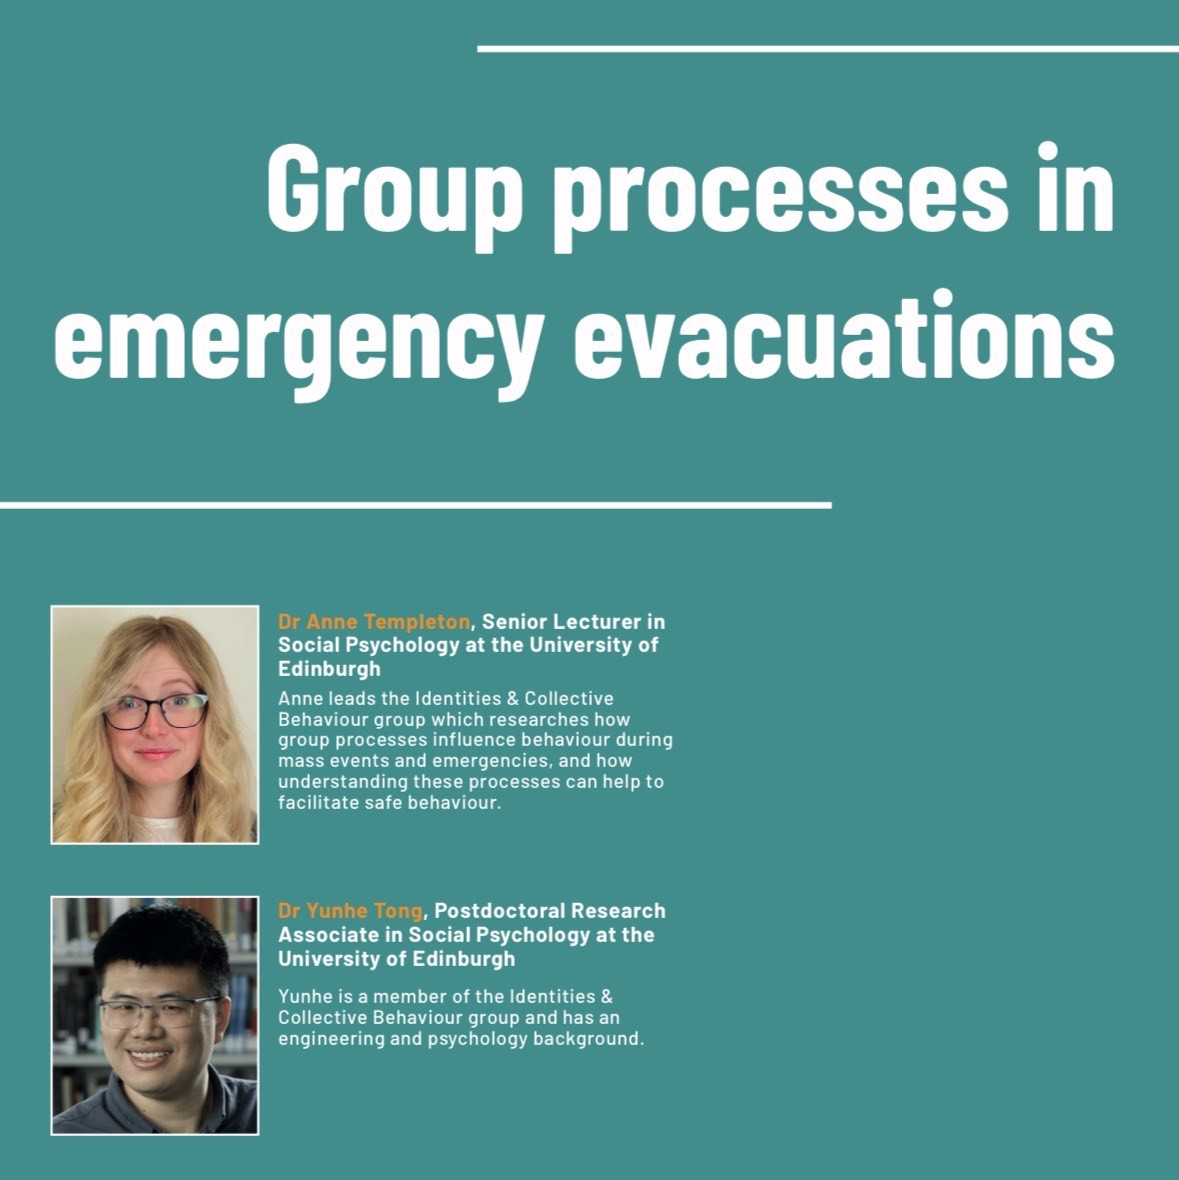 We are delighted to share with you our latest article titled 'Group processes in emergency evacuation', published in the Fire & Risk Management Journal. Available to read here osf.io/dhcwx